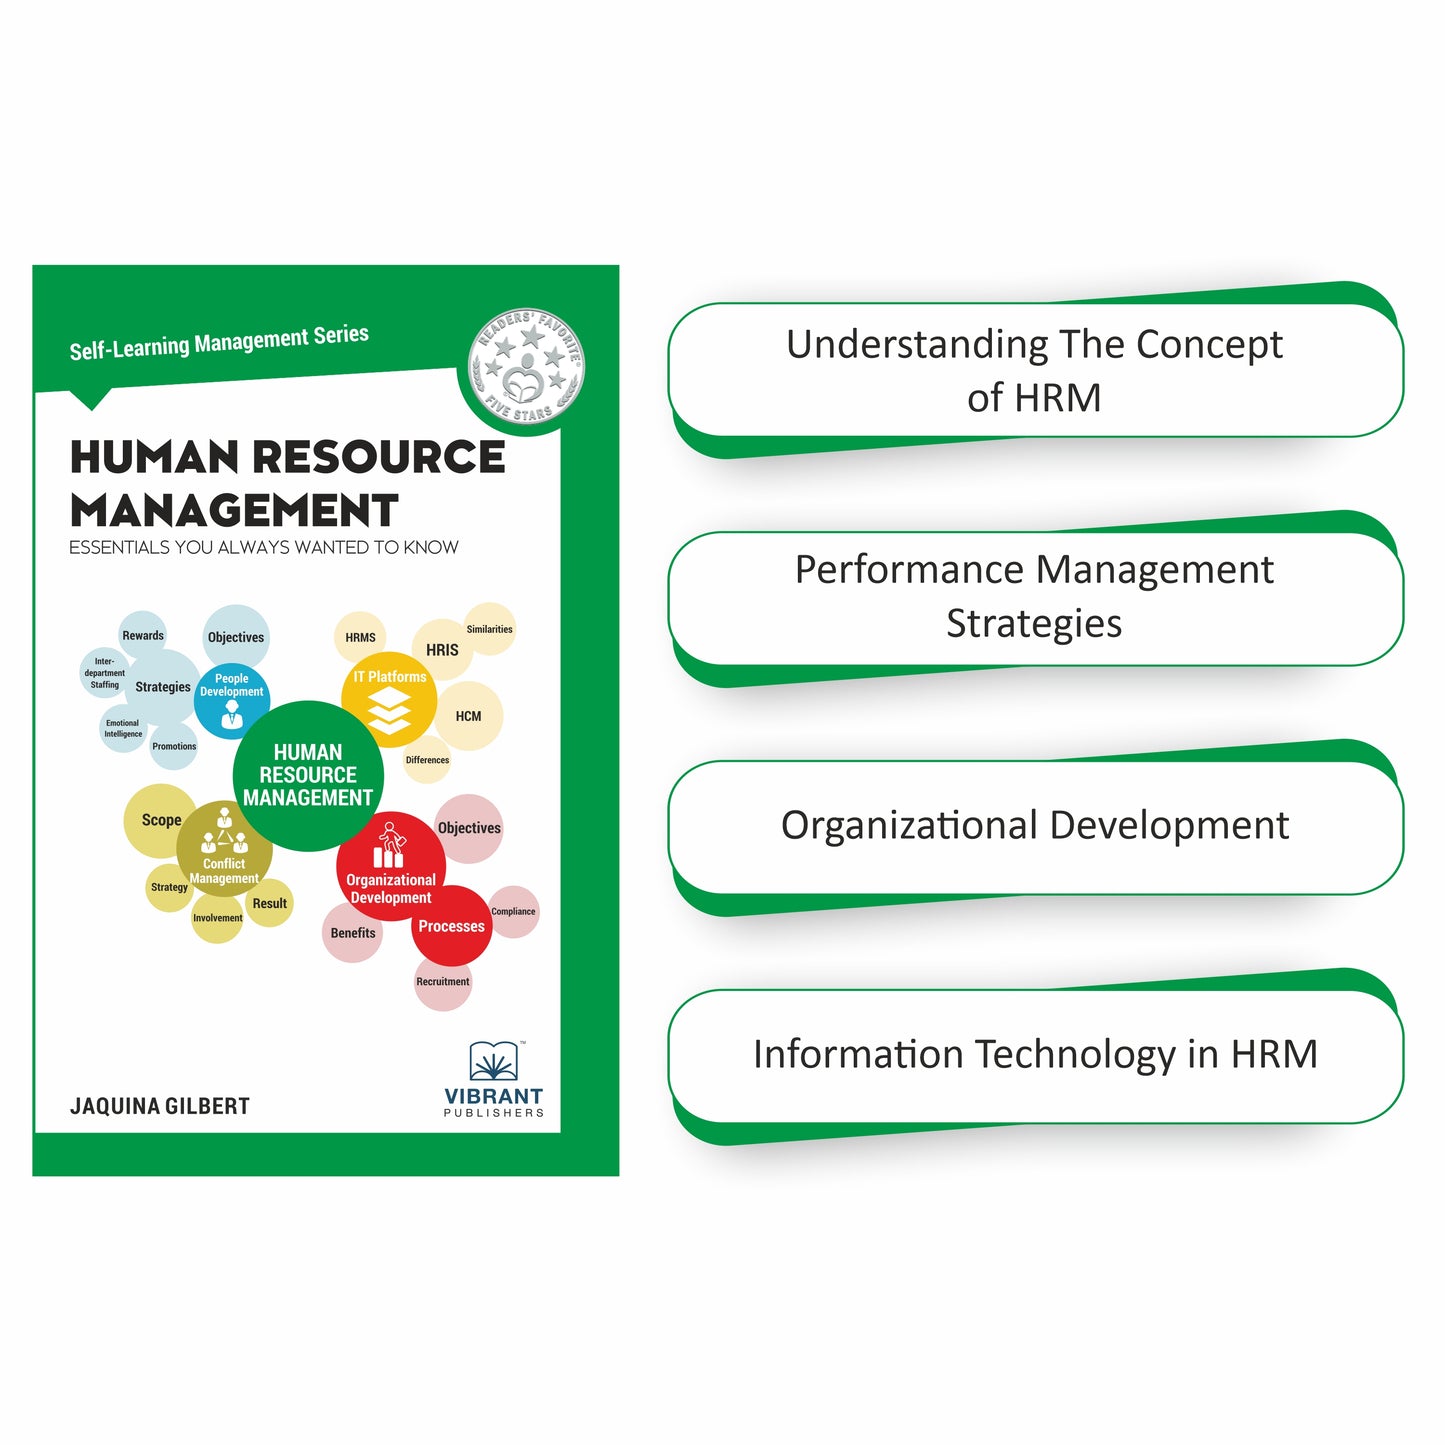 Human Resource Professional BIBLE – MASTER THE SKILLS YOU NEED TO WIN THE NEXT HR POSITION – Includes Strategies, Analysis & 200+ Interview Questions